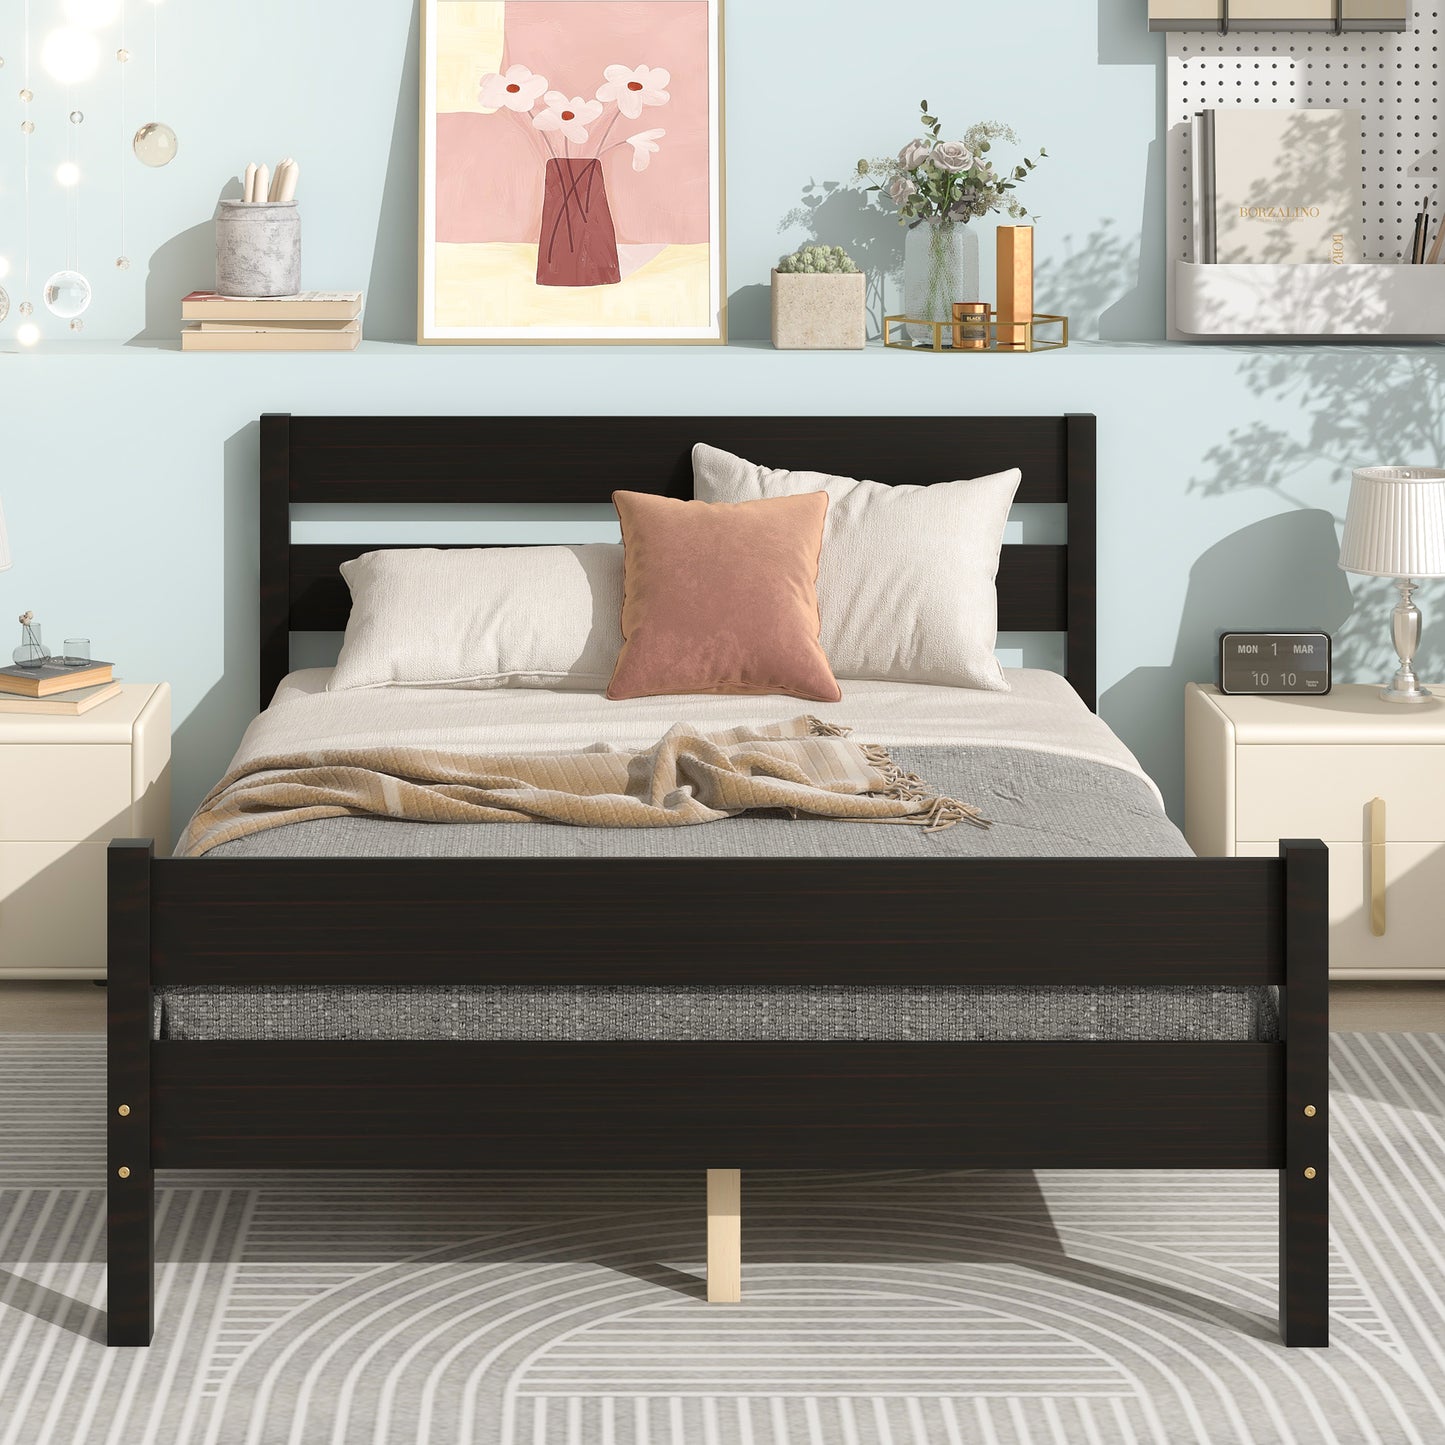 Wood Twin Platform Bed Frame with Headboard and Footboard for Kids Boys Girls Teens Adults, Espresso, LJ797